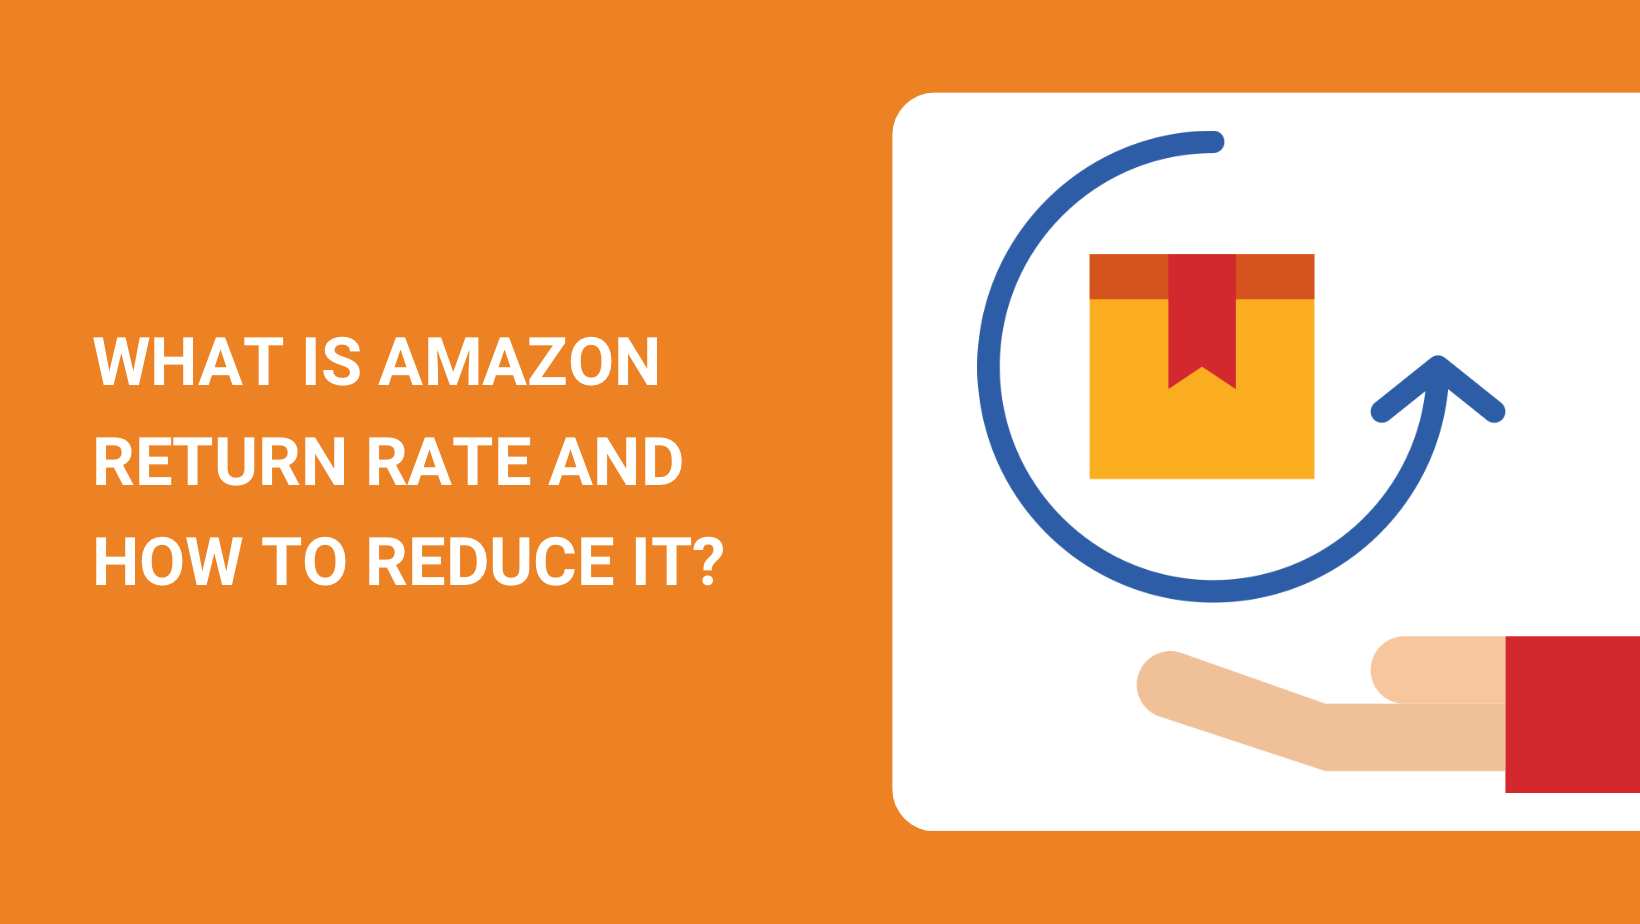 What Is Amazon Return Rate and How to Reduce It?